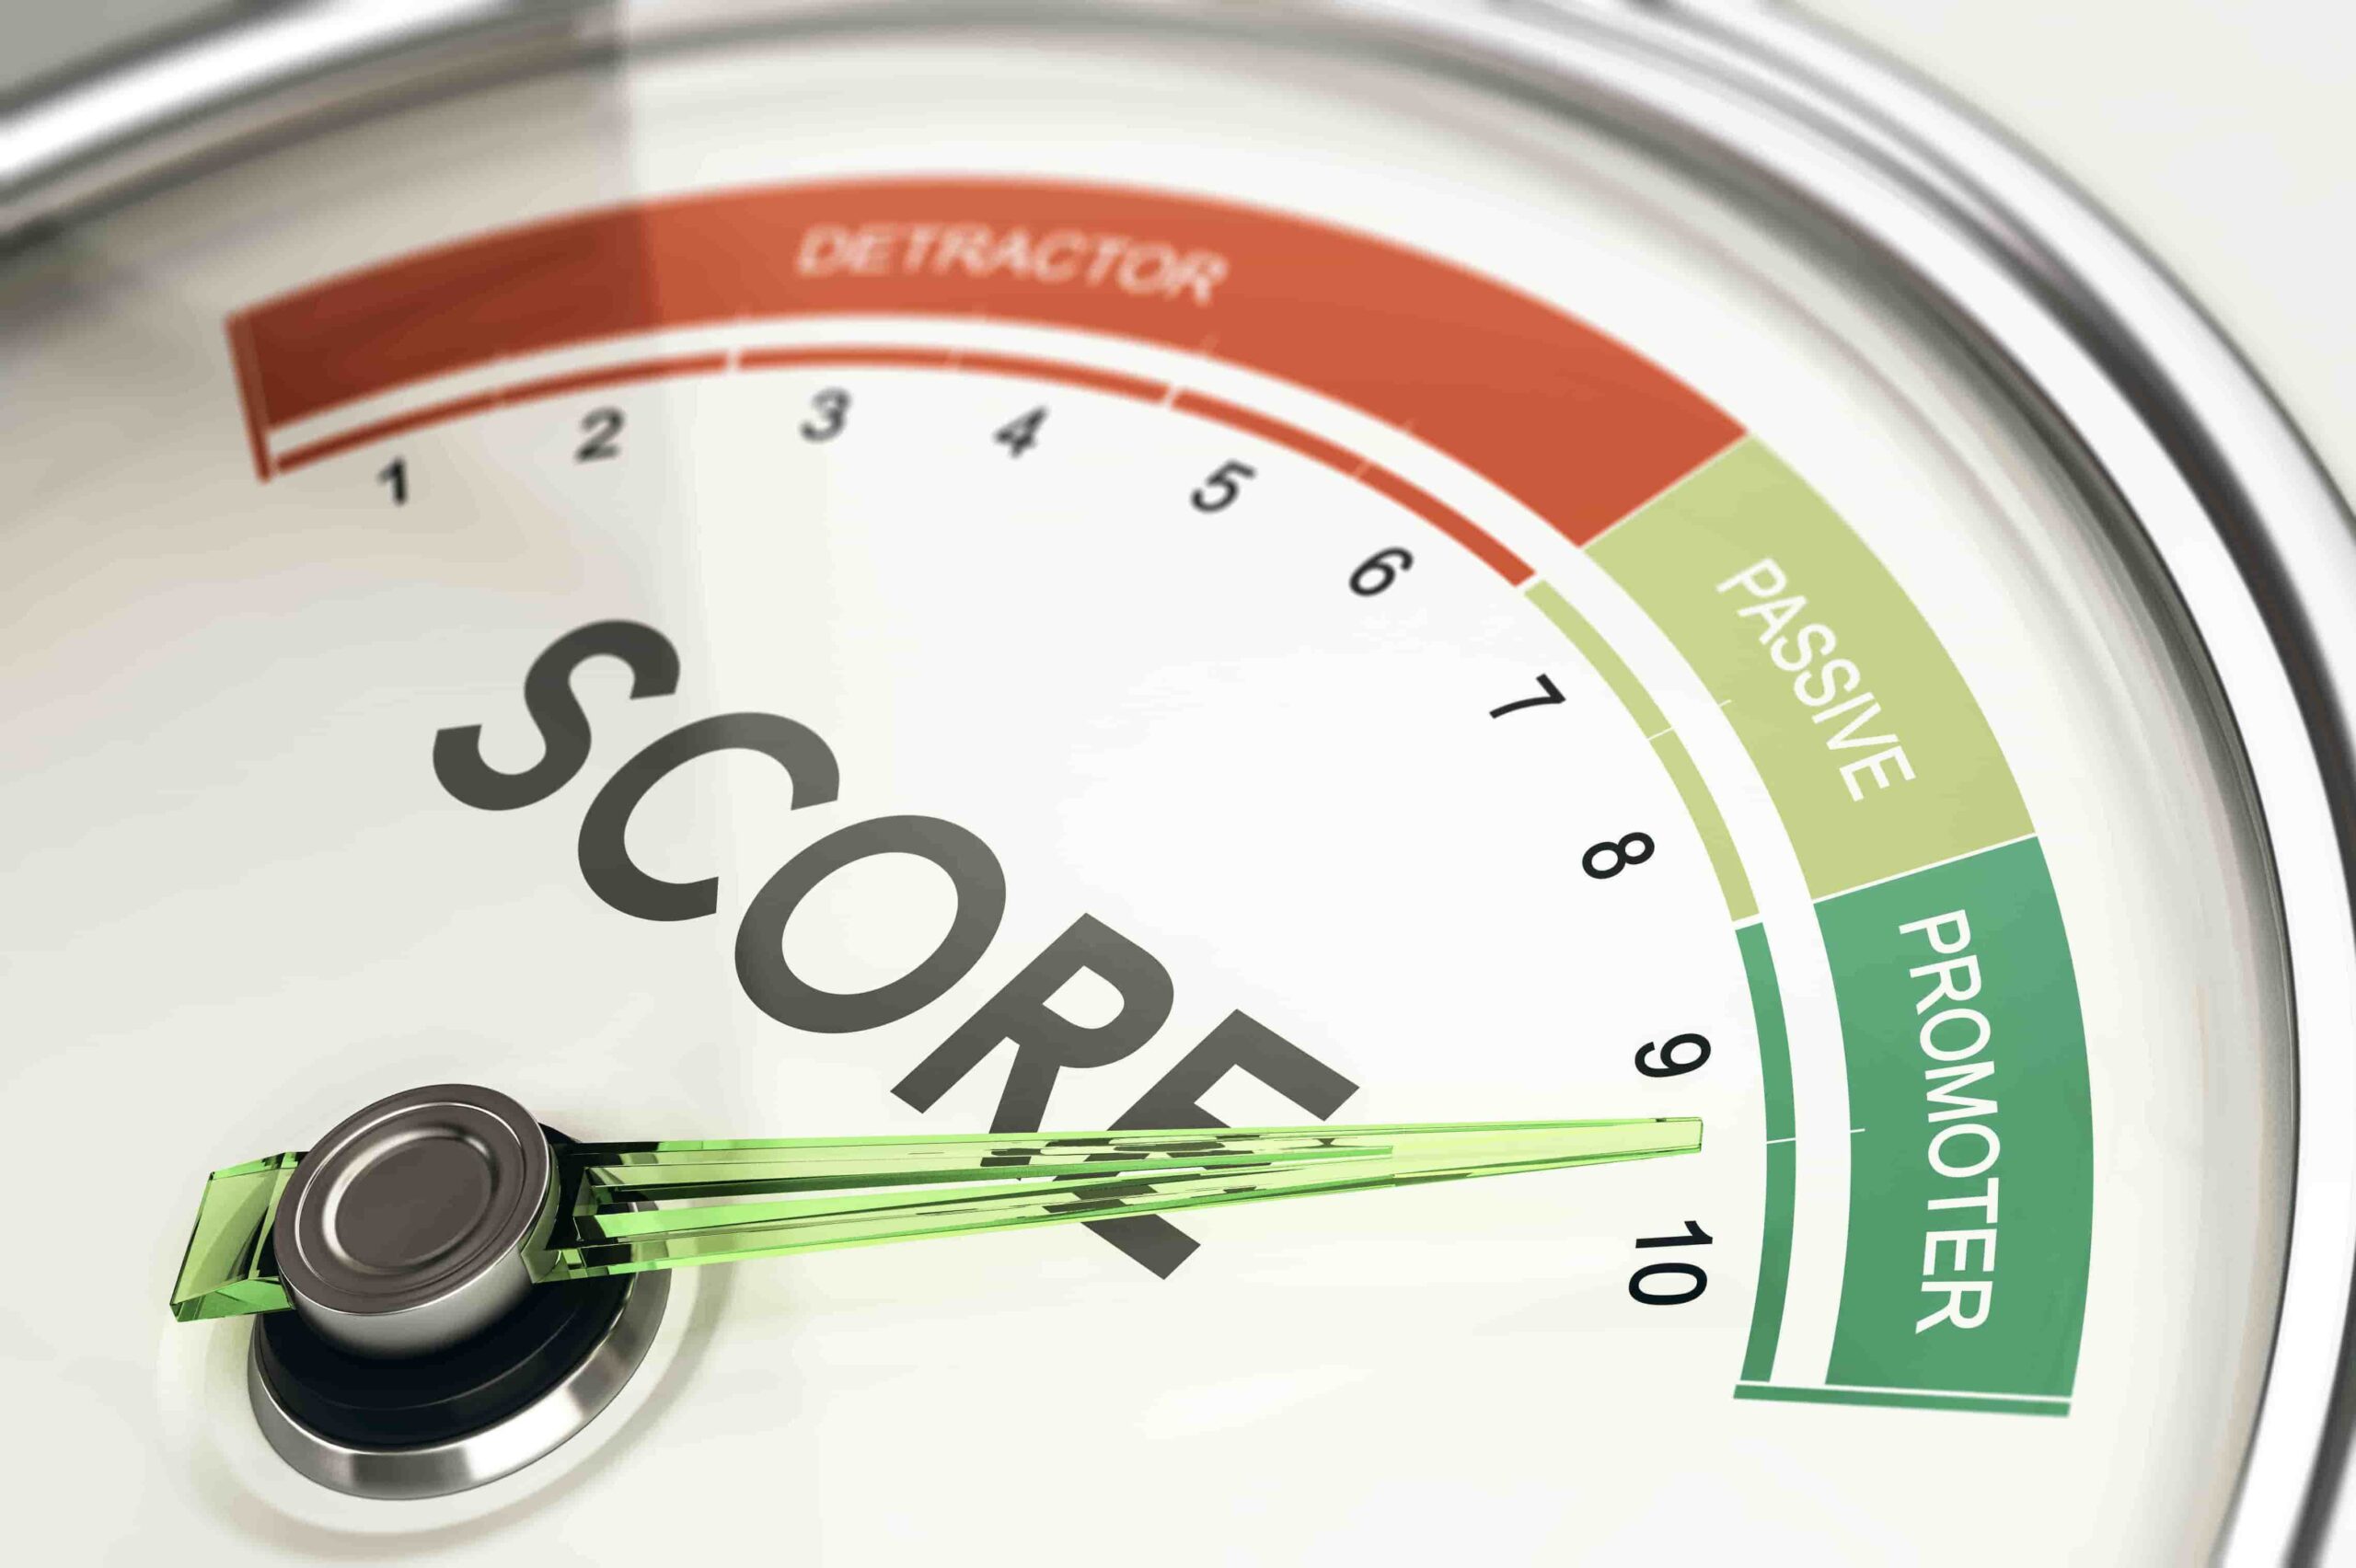 The High’s and Low’s of Net Promoter Score